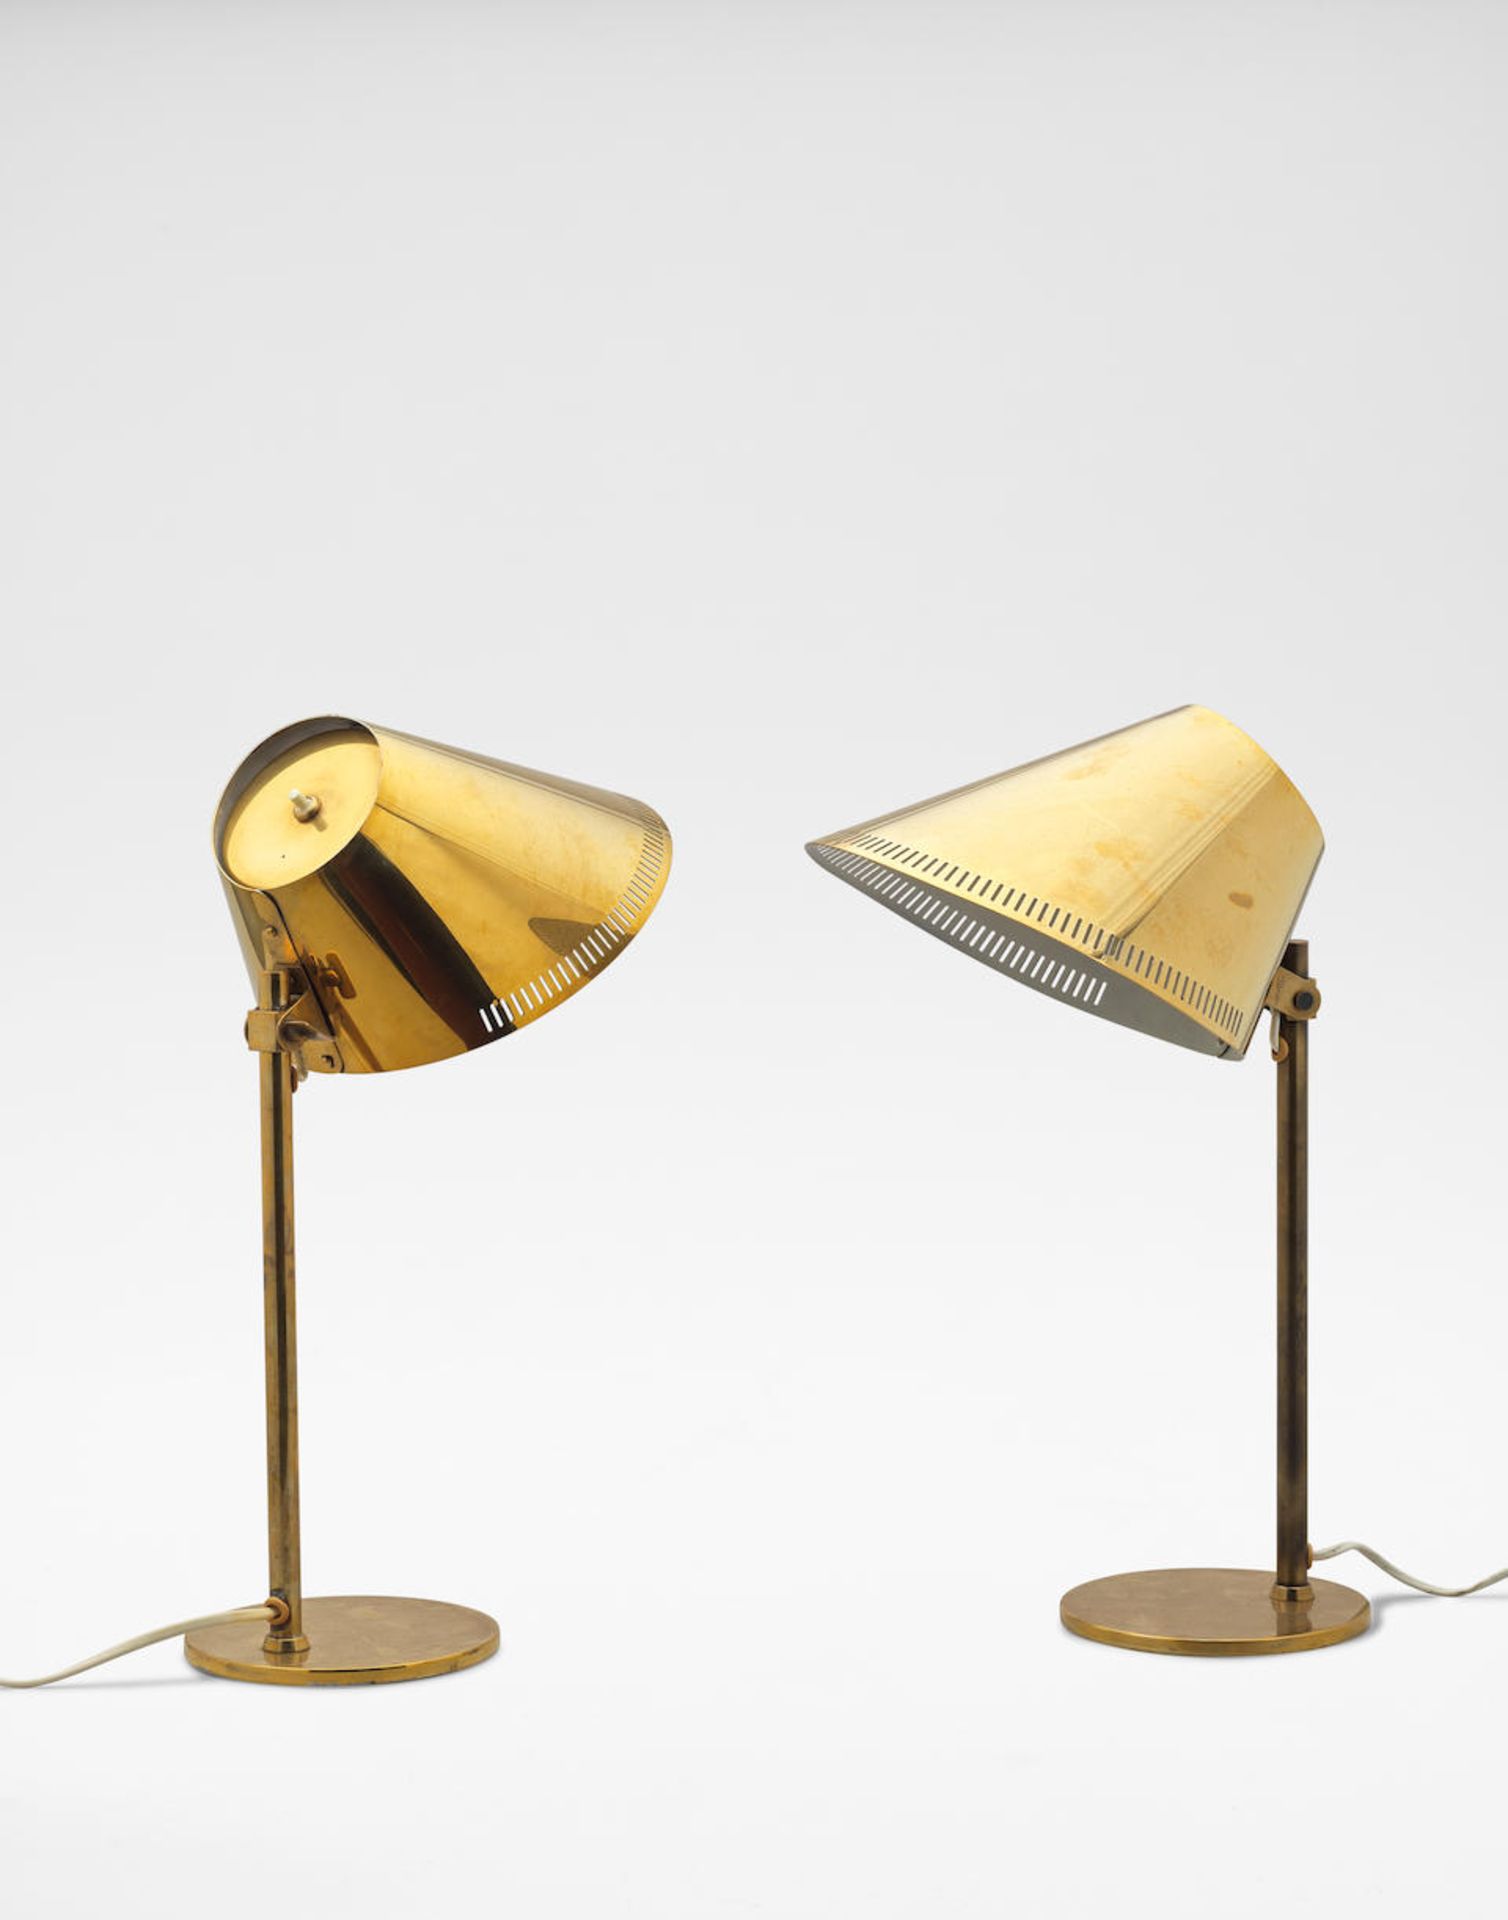 Paavo Tynell Pair of adjustable desk lamps, model no. 9227, circa 1958